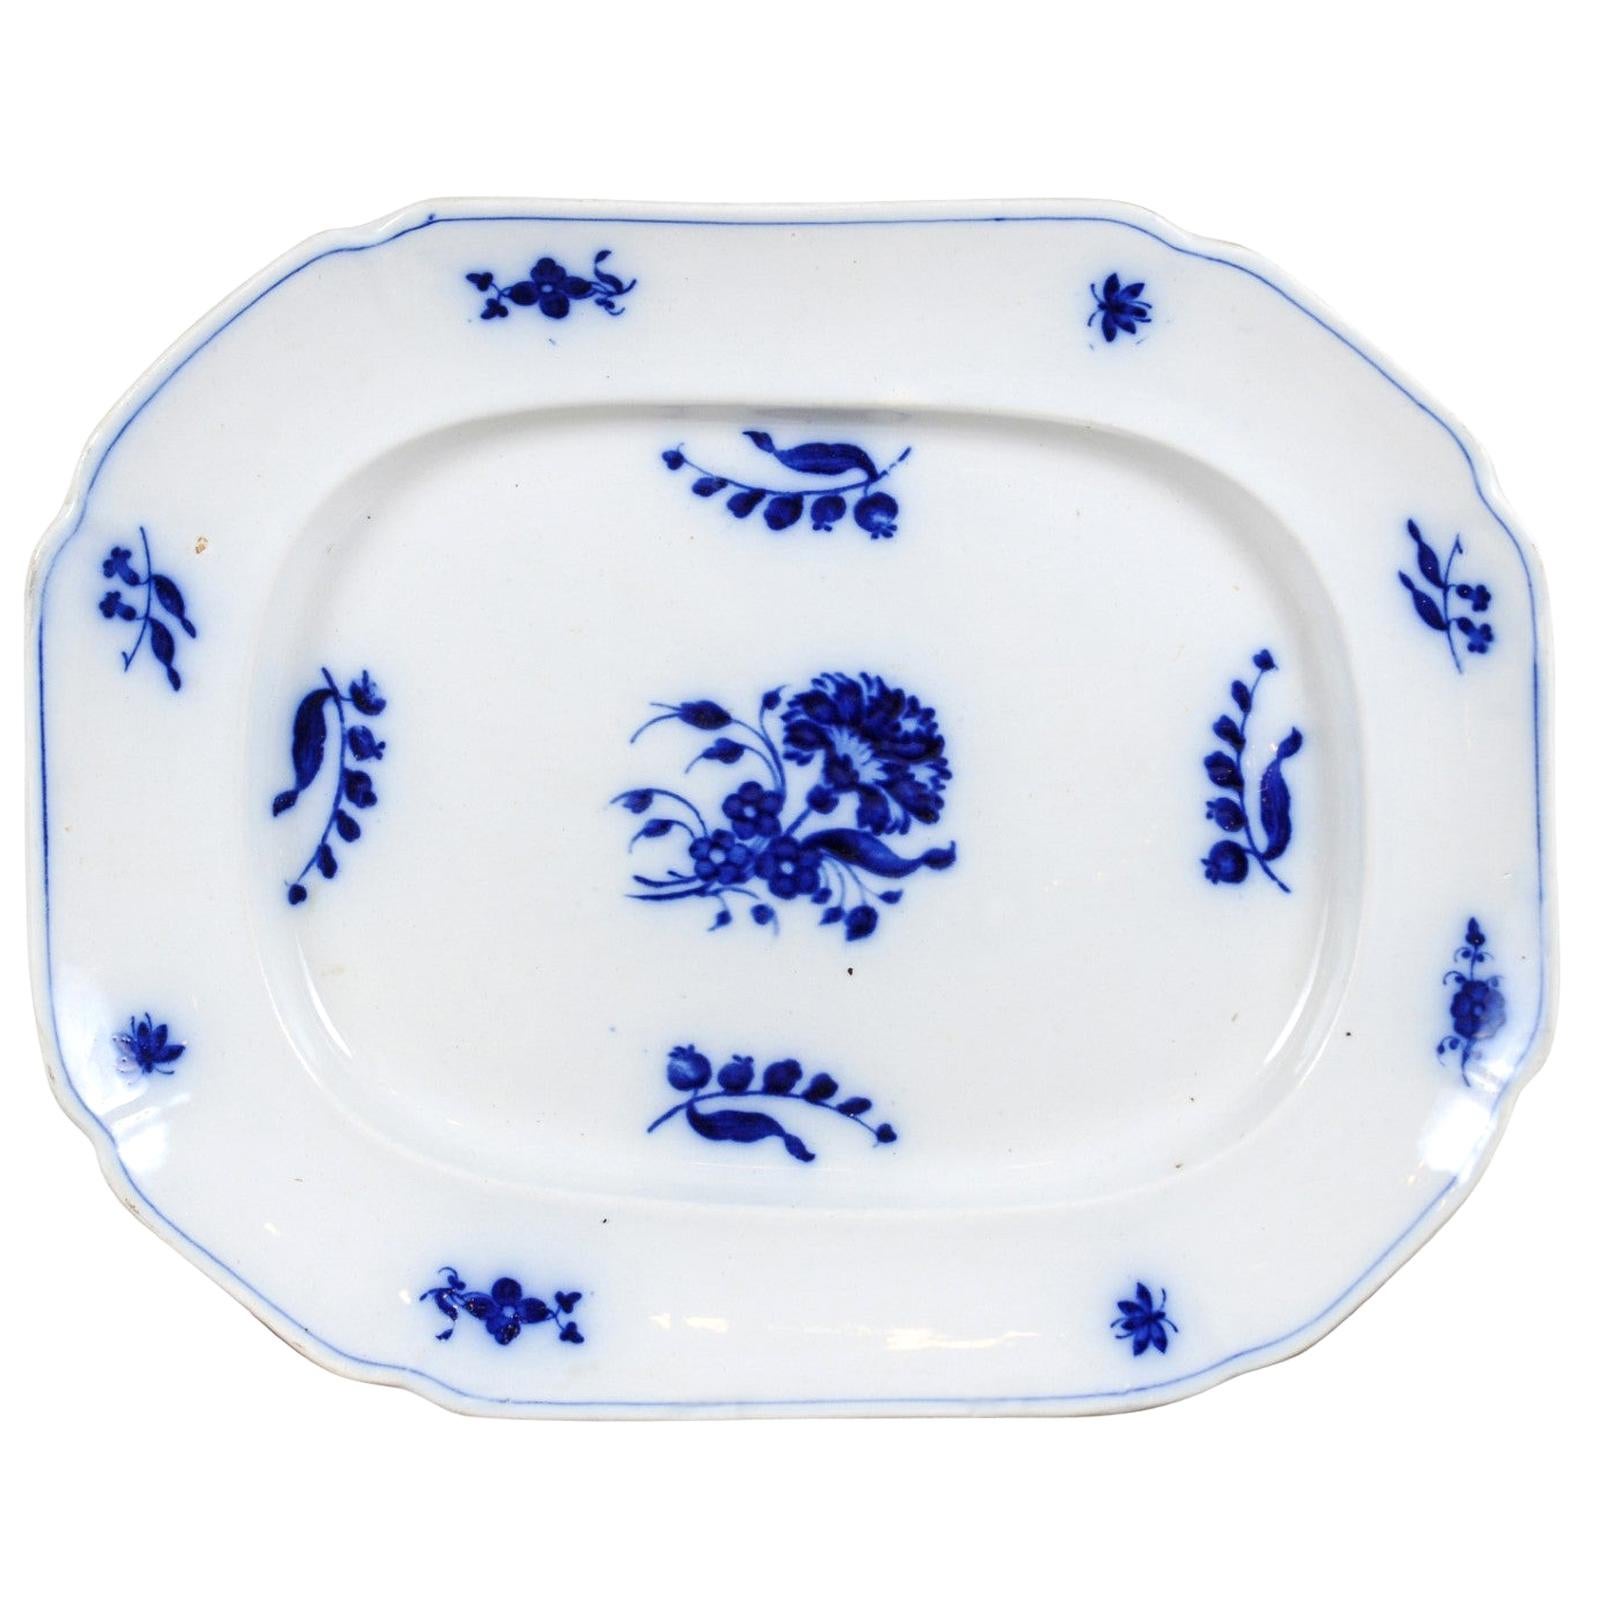 English 19th Century Blue and white Platter with Floral and Foliage Decor